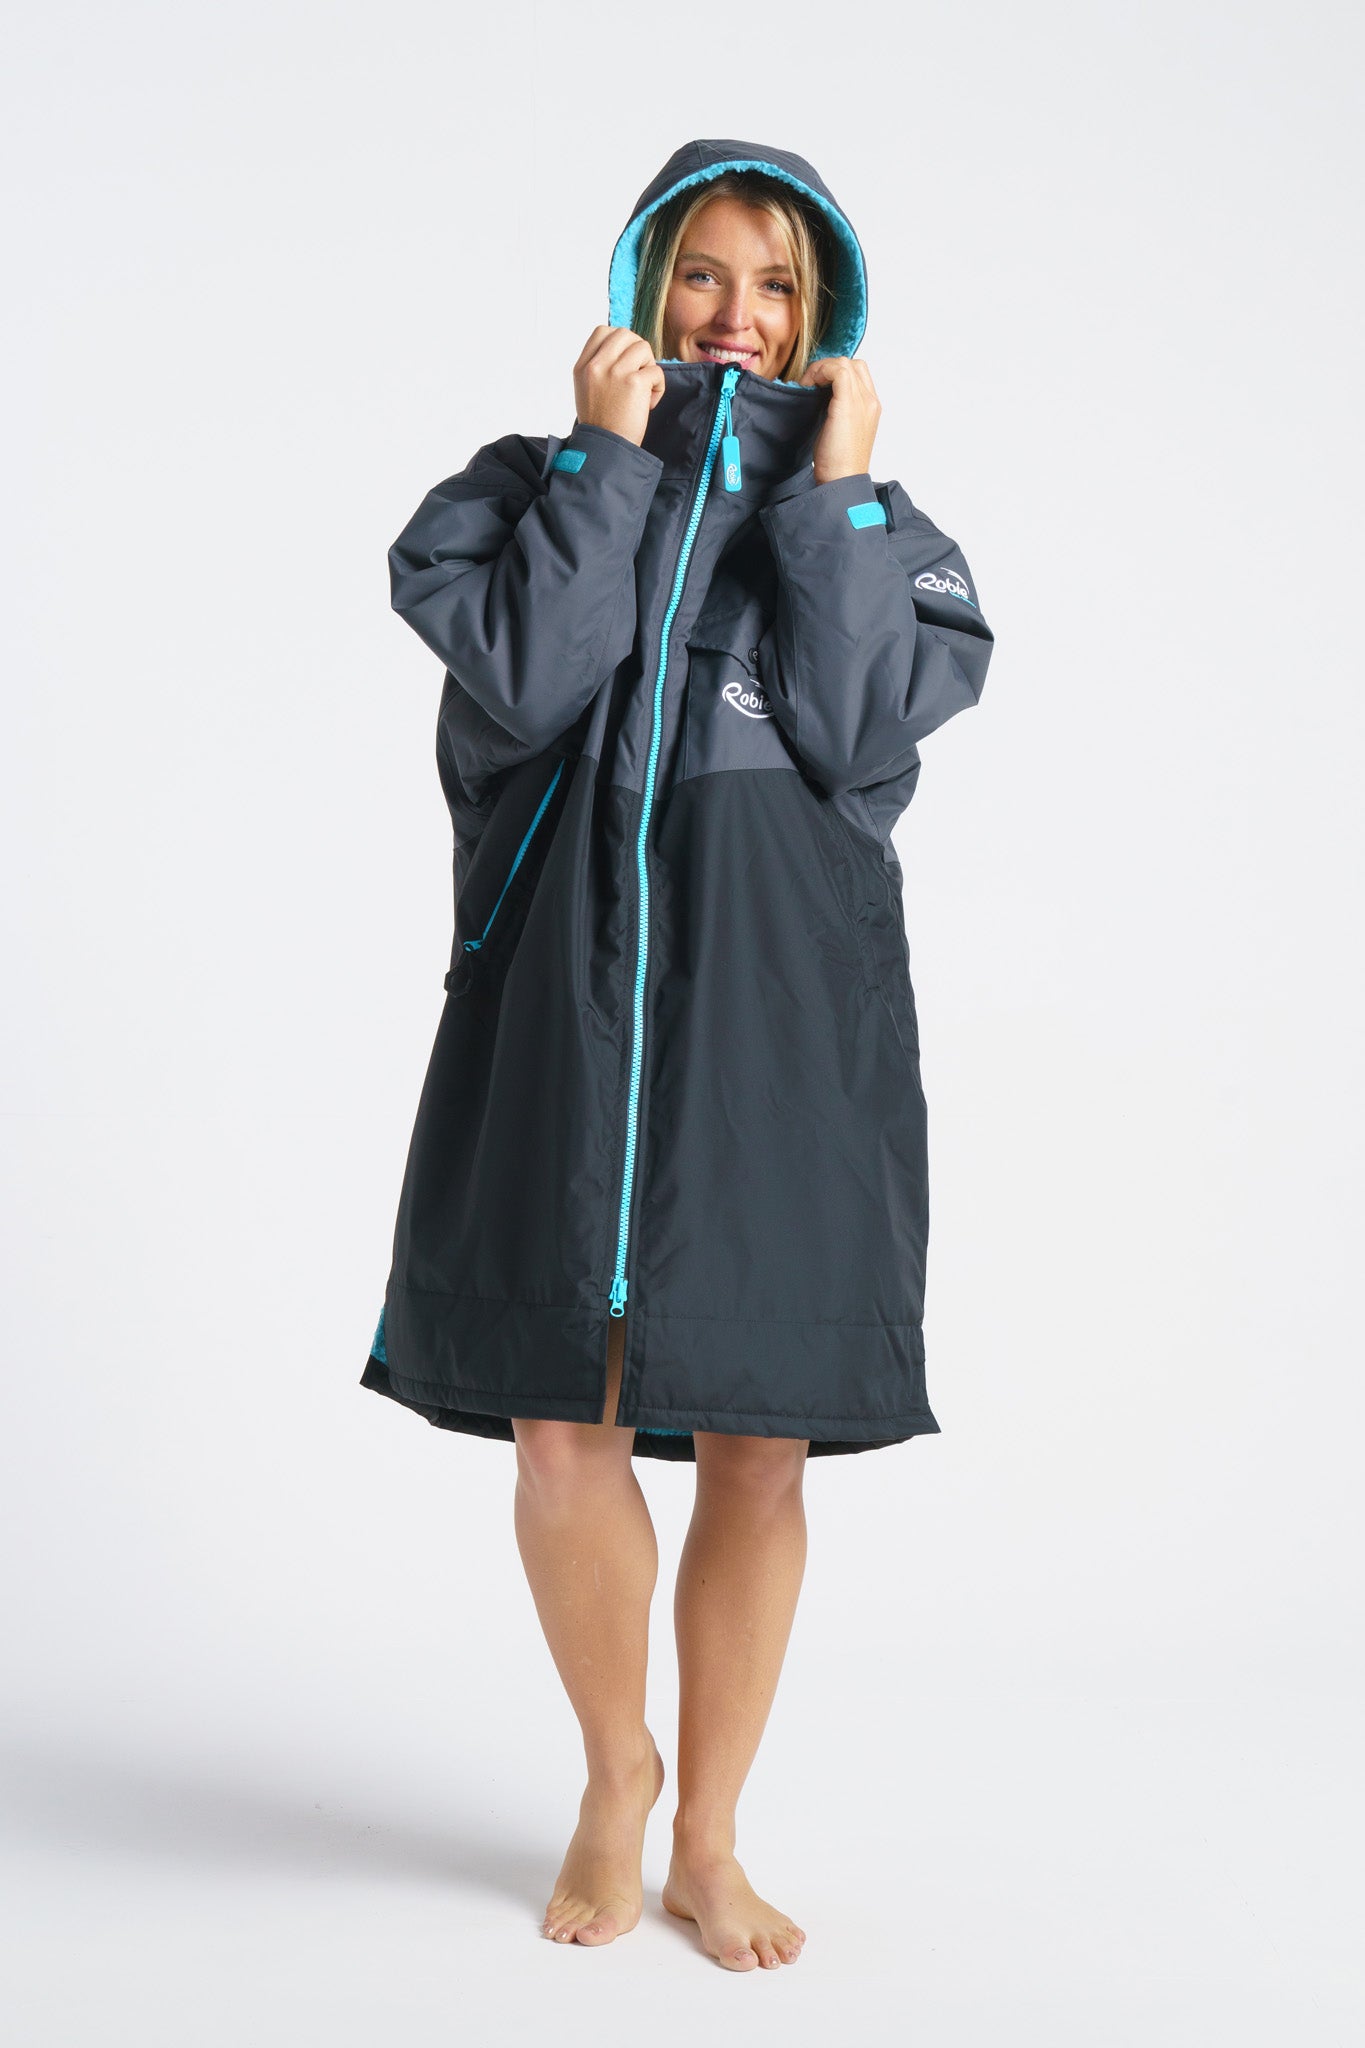 robie-robes-dry-series-changing-robe-waterproof-preorder-product-blacksheepsurfco-galway-ireland-charcoal-blue-atoll-small-3